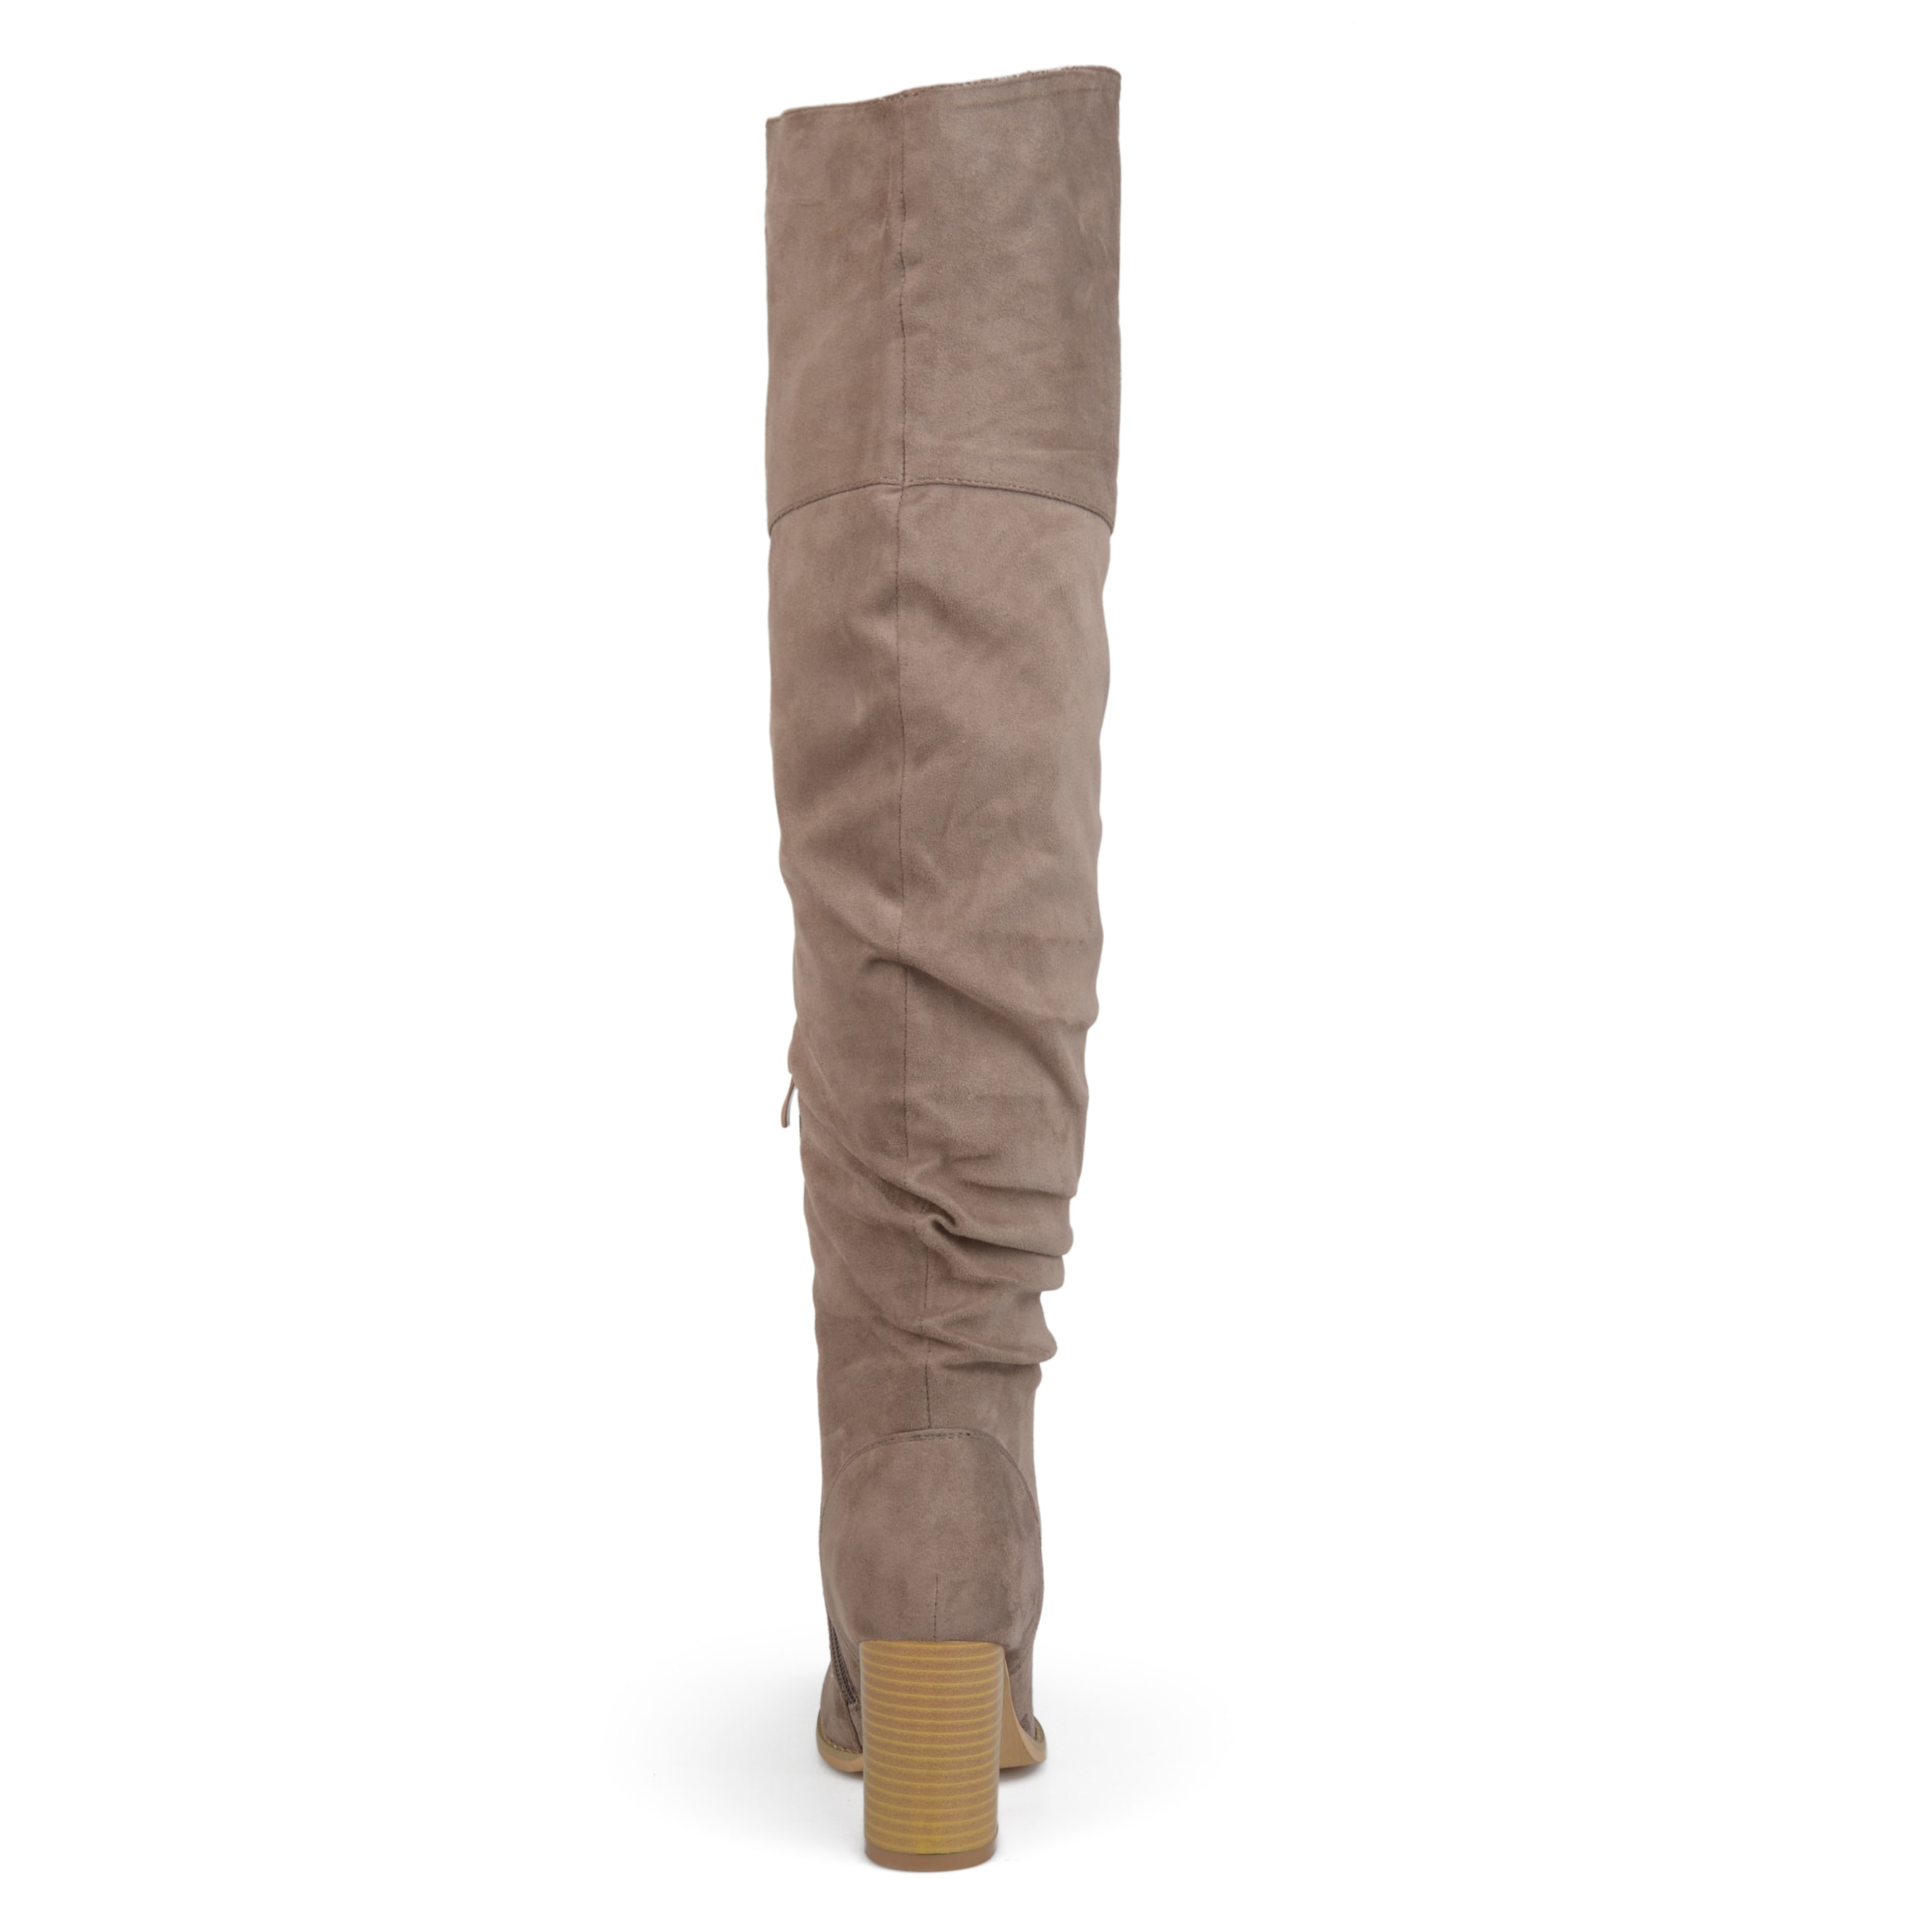 wide shaft over the knee boots